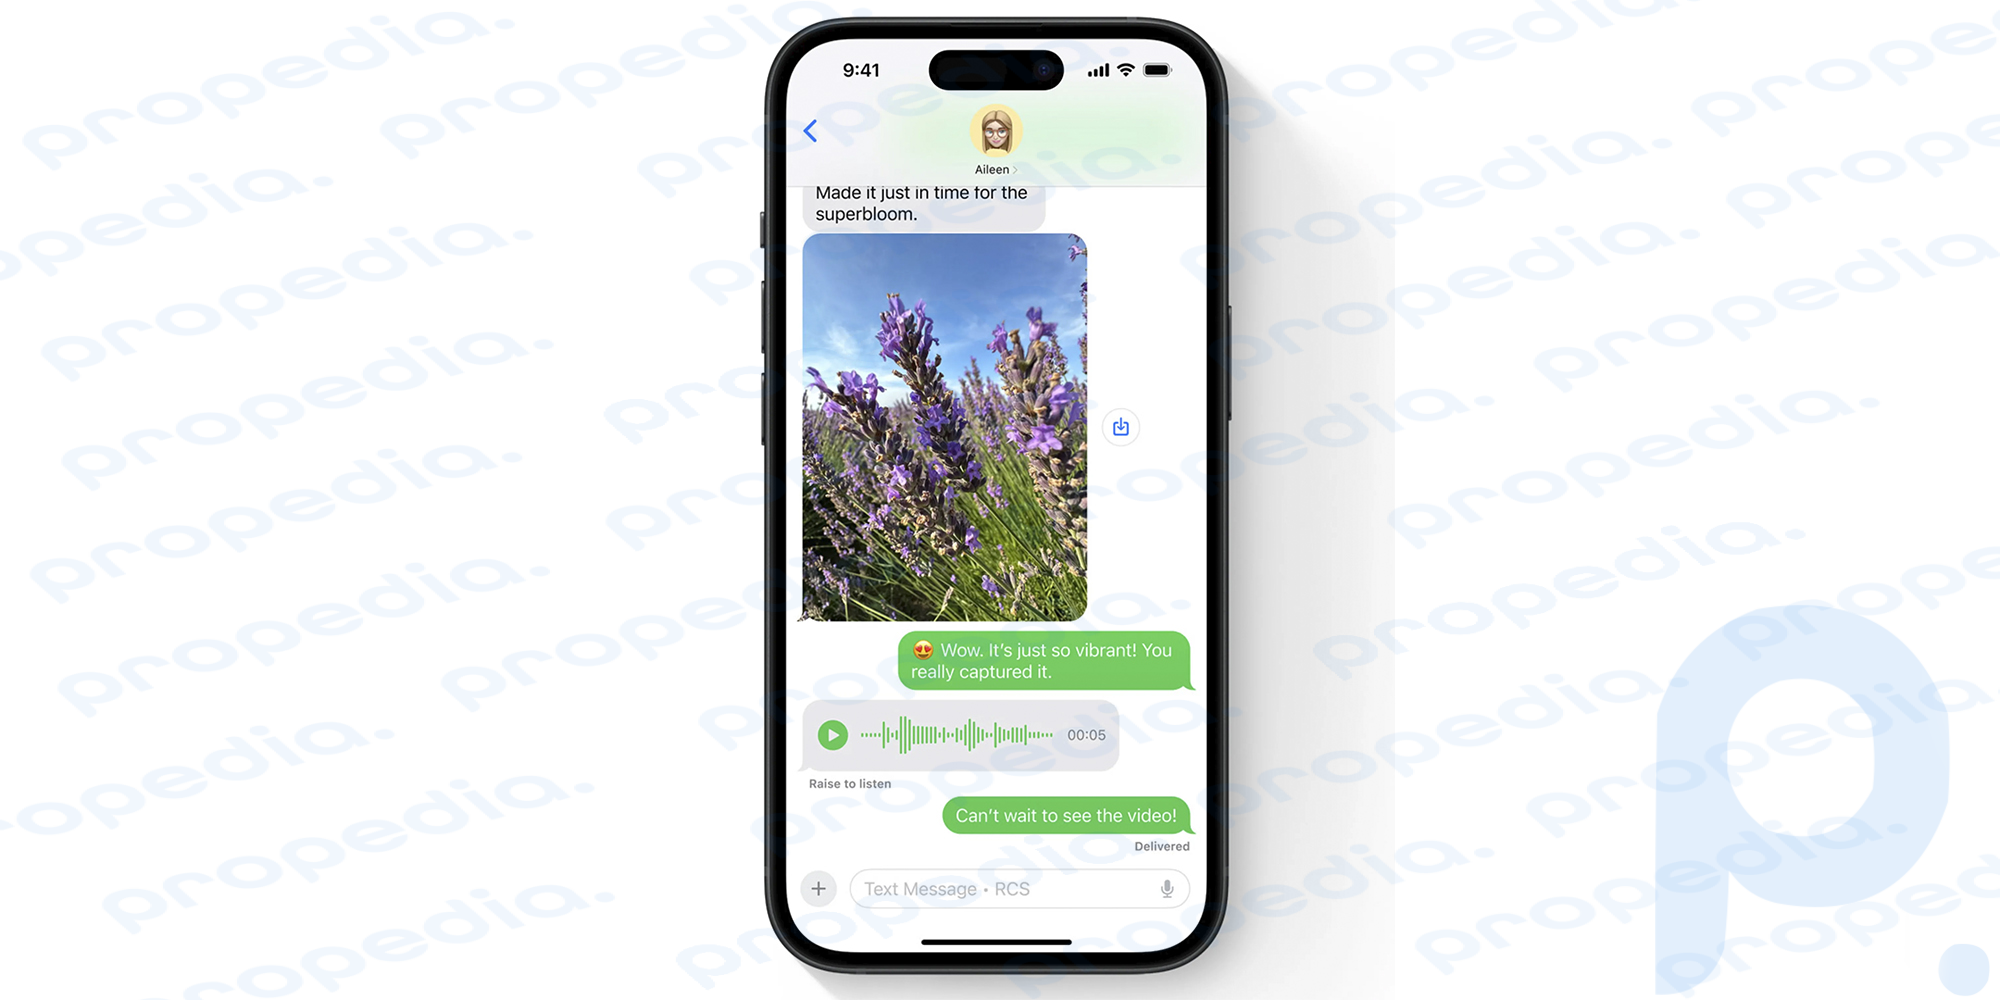 Apple is bringing RCS messages to iPhone in iOS 18. It's a replacement for SMS